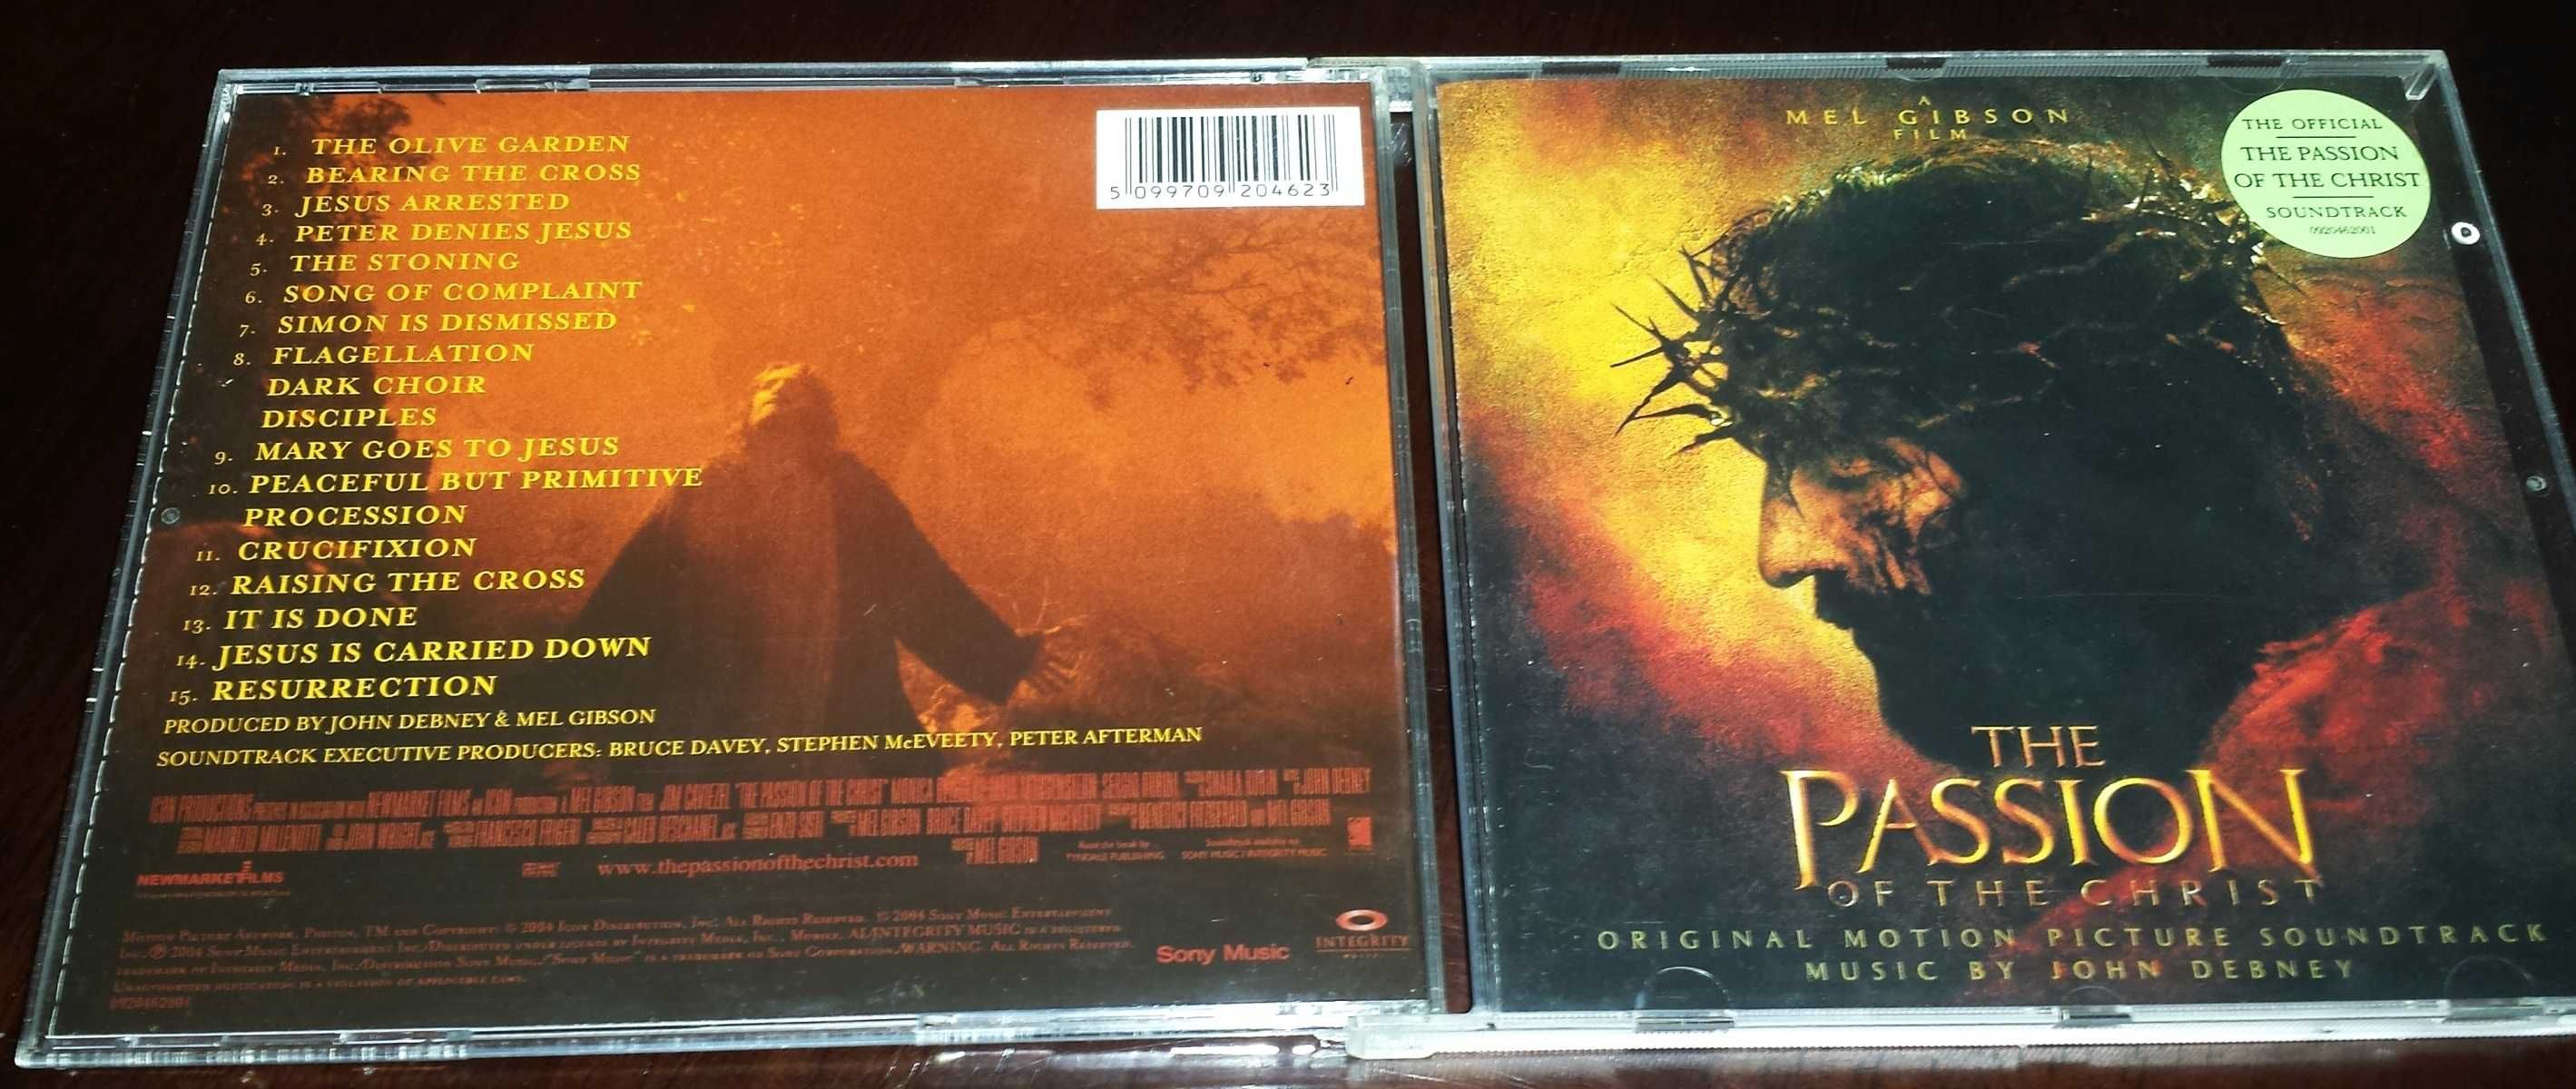 John Debney - The Passion of the Christ CD